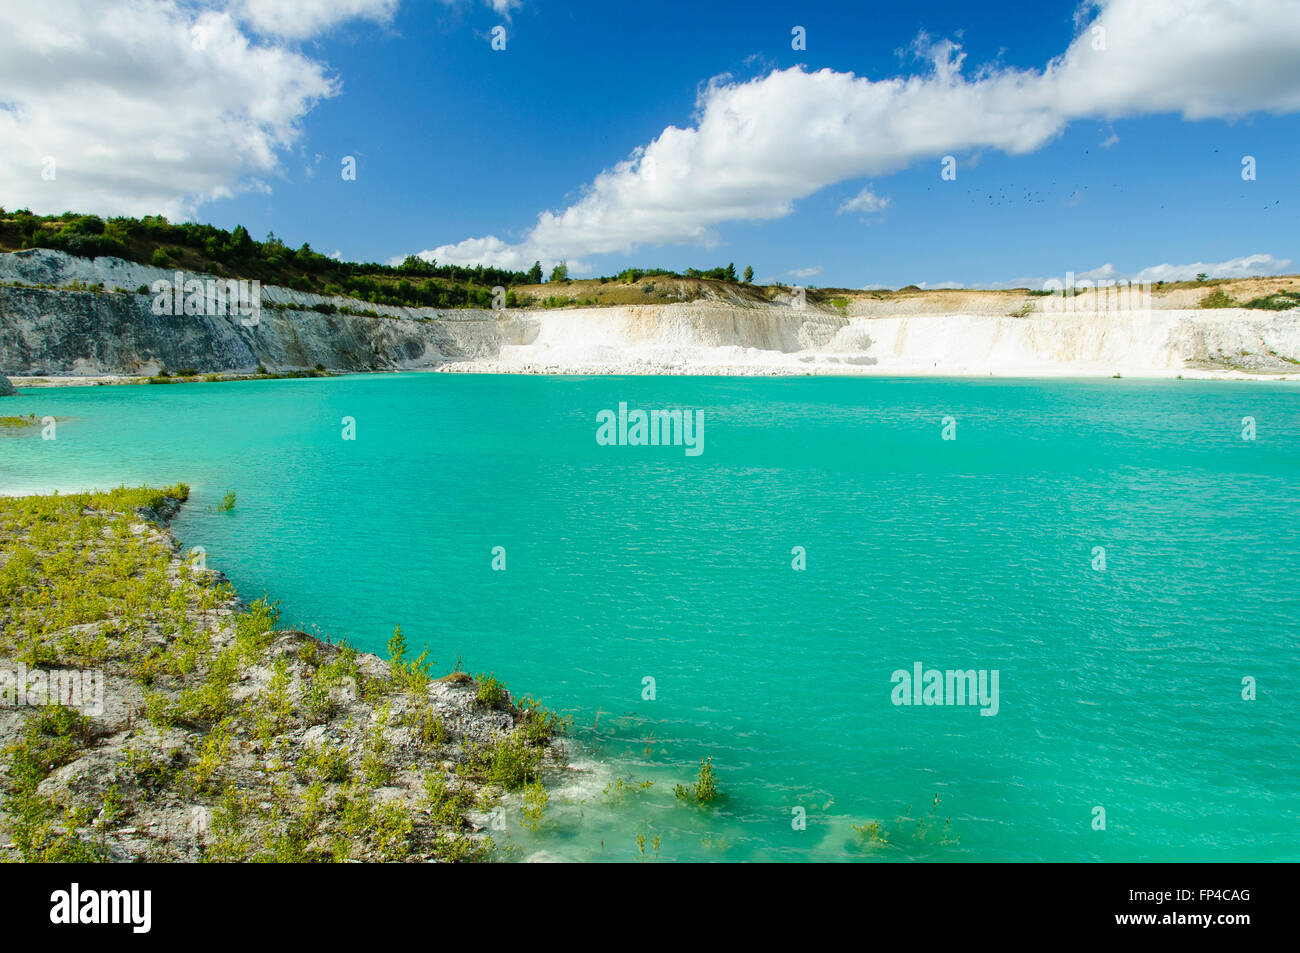 A turquoise lake with white cliff in Denmark Stock Photo